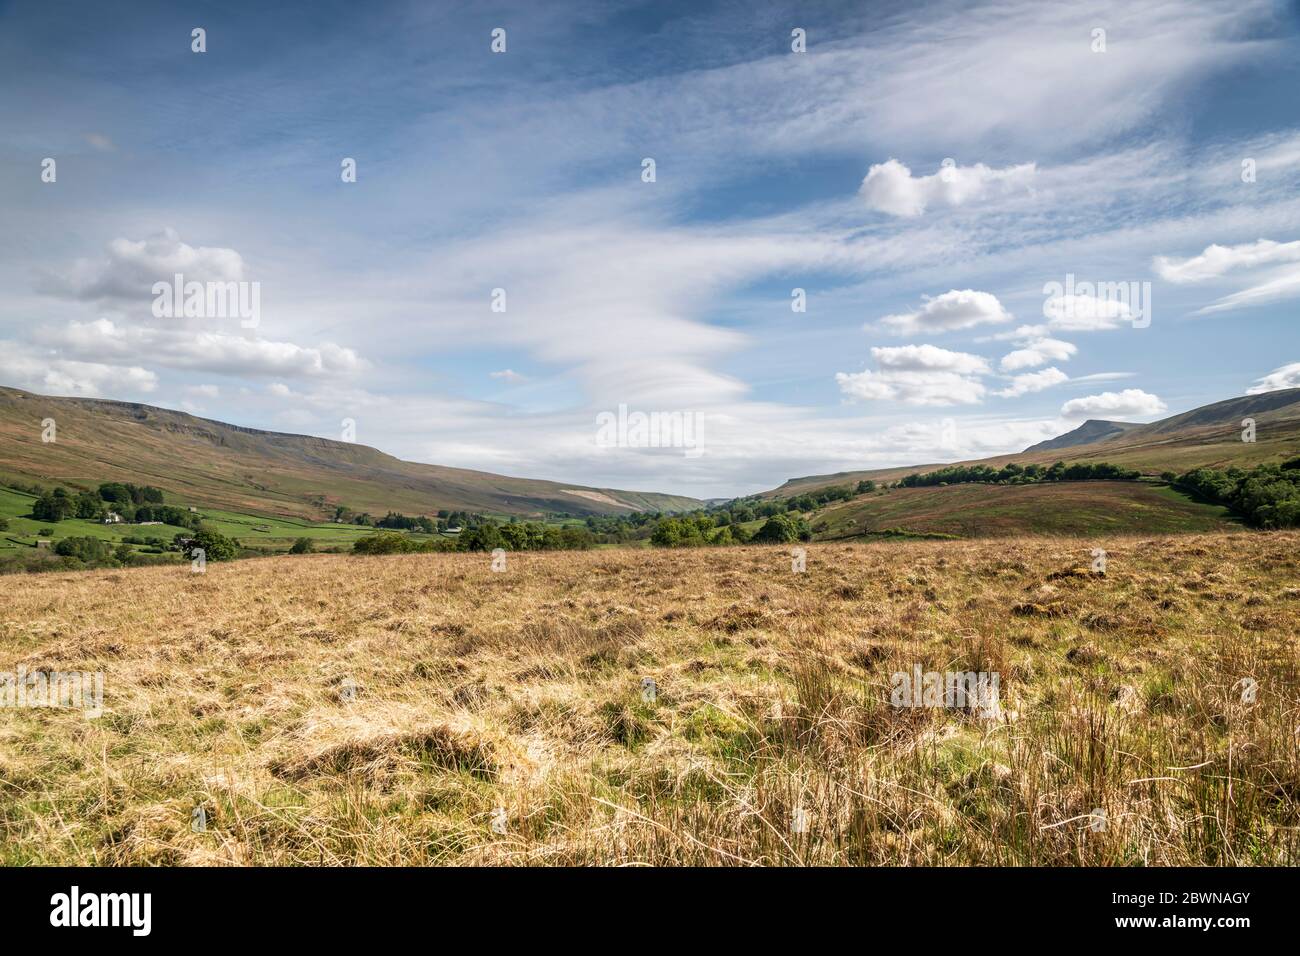 A summer three images HDR picture of Wild Boar Fell, in the Yorkshire Dales National Park, taken from Wharton Fell in Cumbria. 27 May 2020 Stock Photo